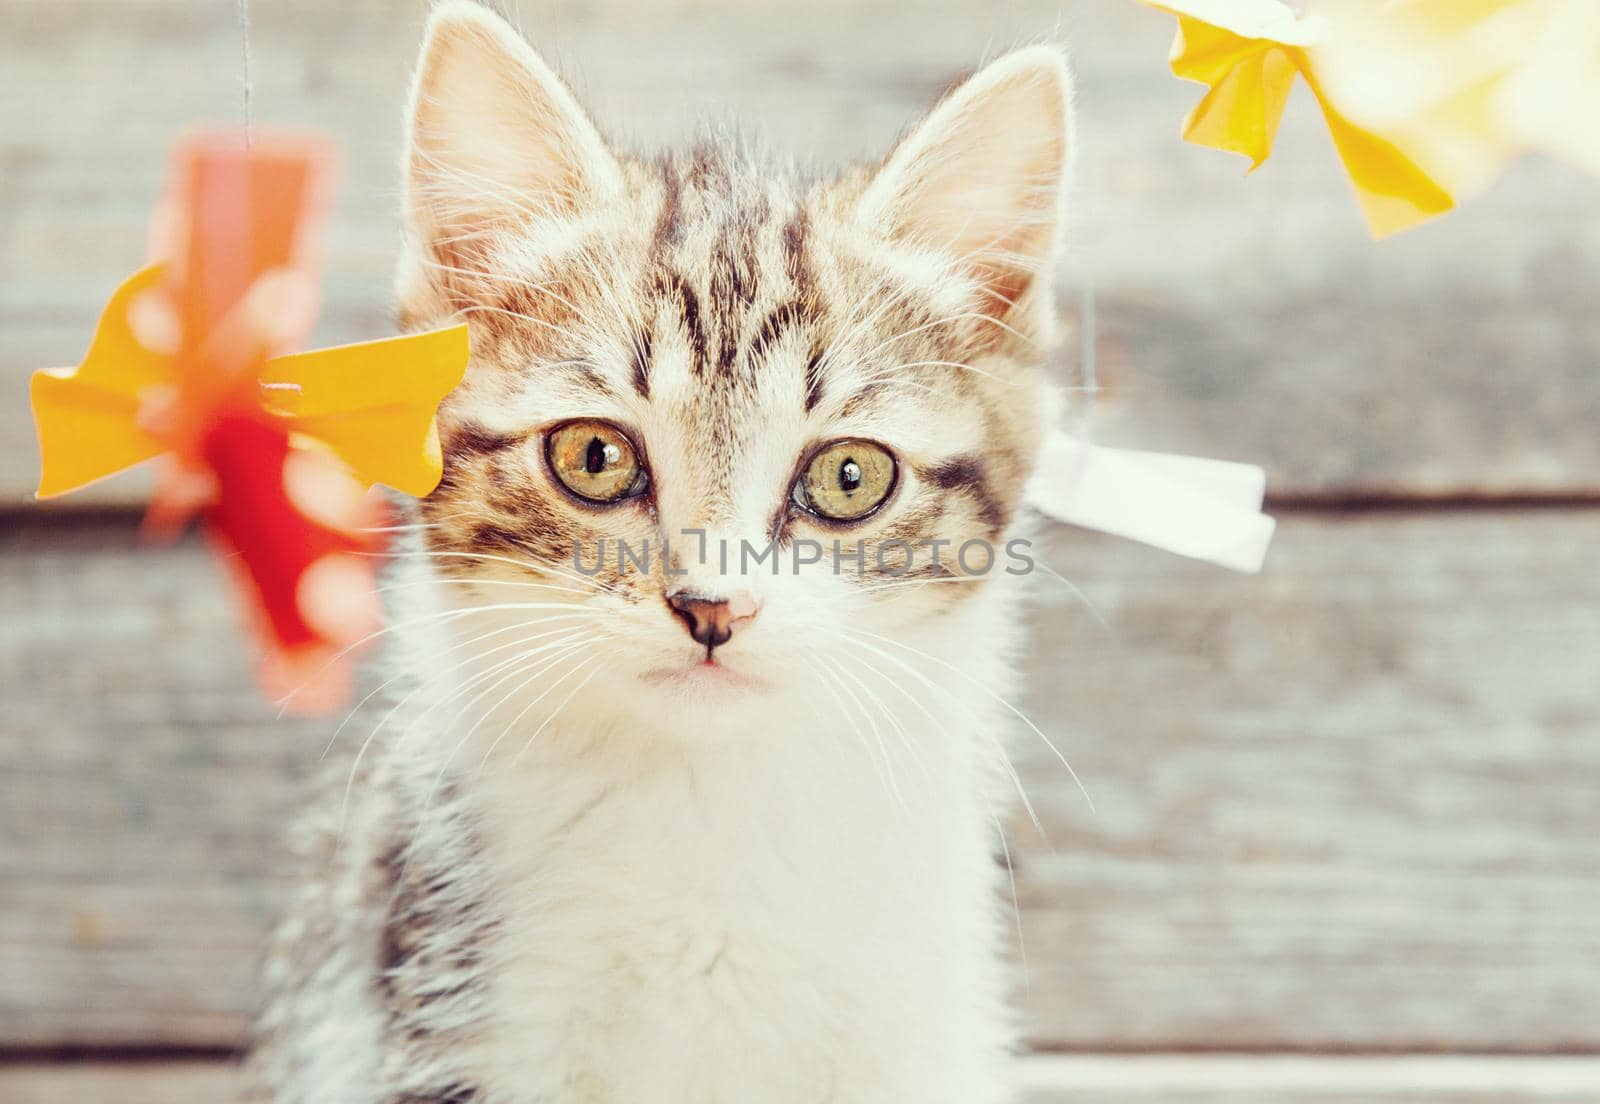 Cute little kitten sits among colorful paper bows and looks at camera